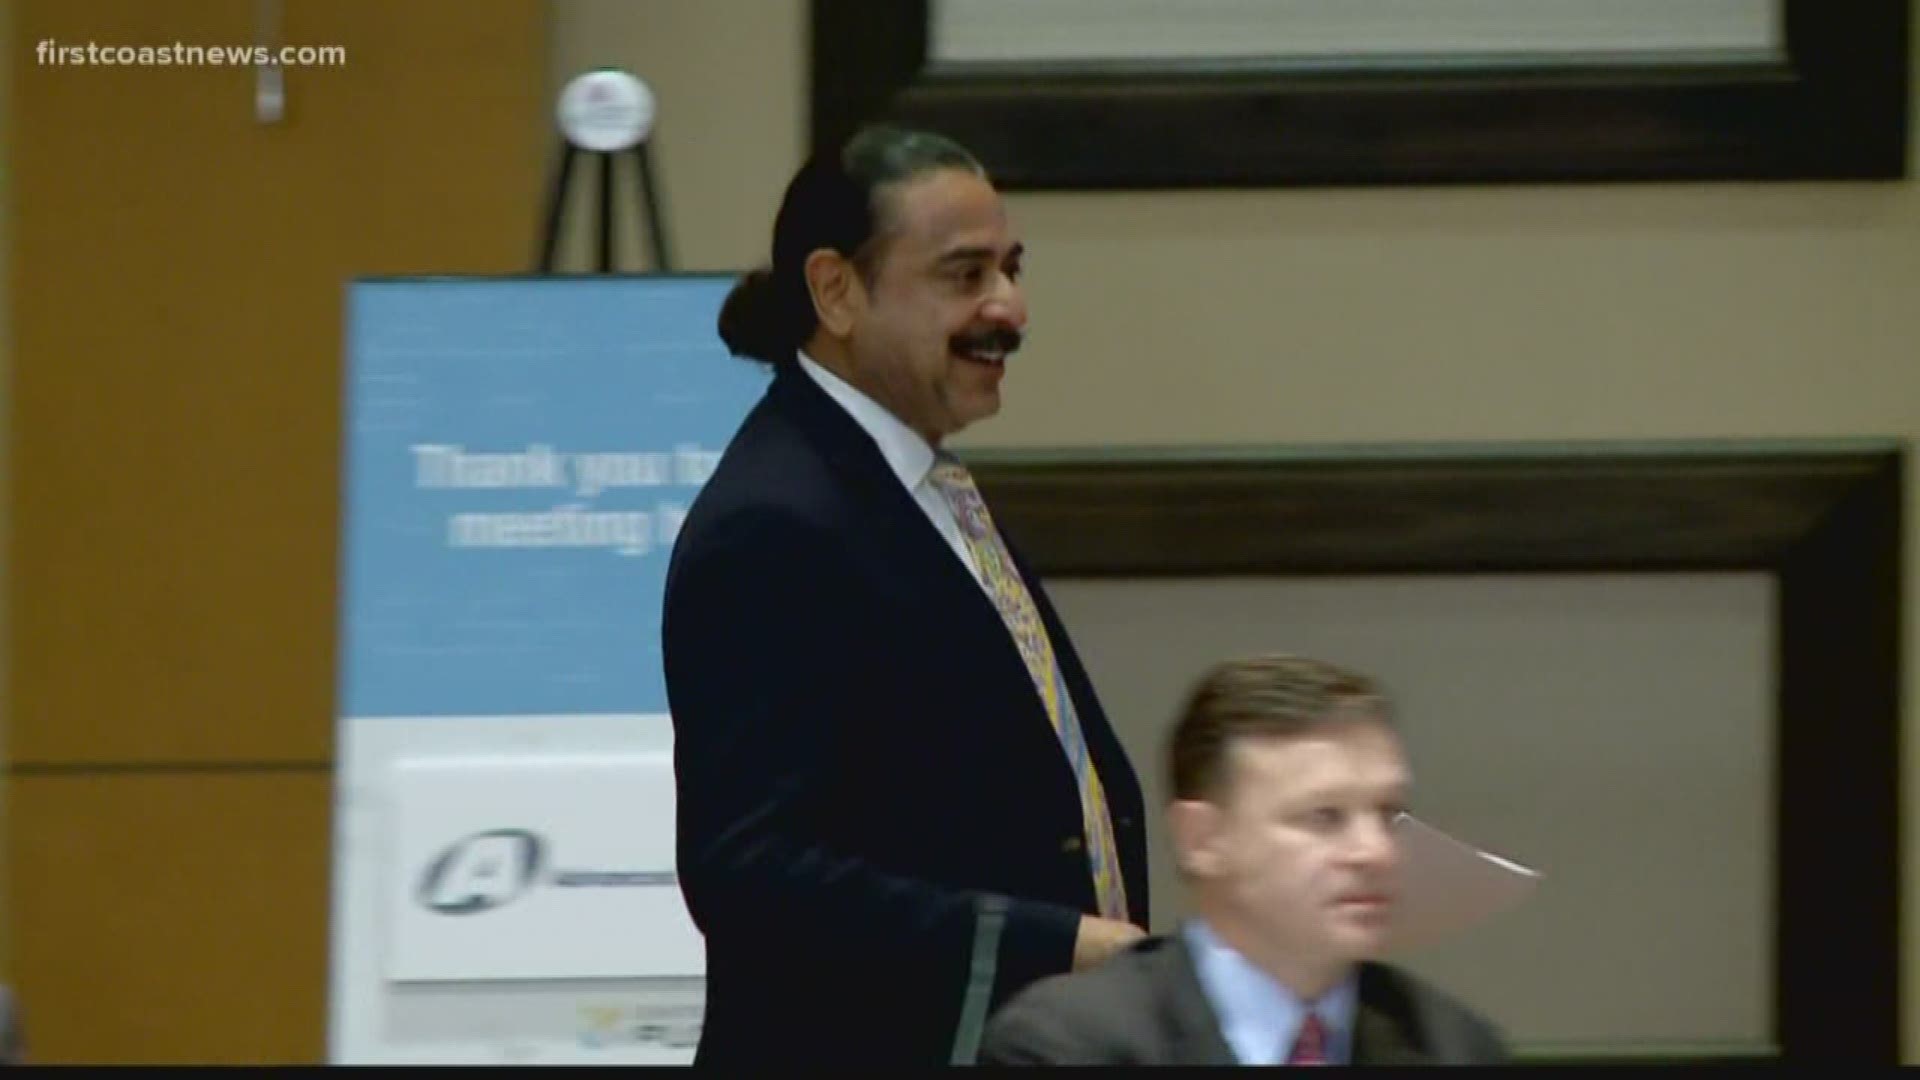 Jags owner Shad Khan’s donation is designed to provide essential support to local organizations focused on the immediate health, well-being of First Coast residents.